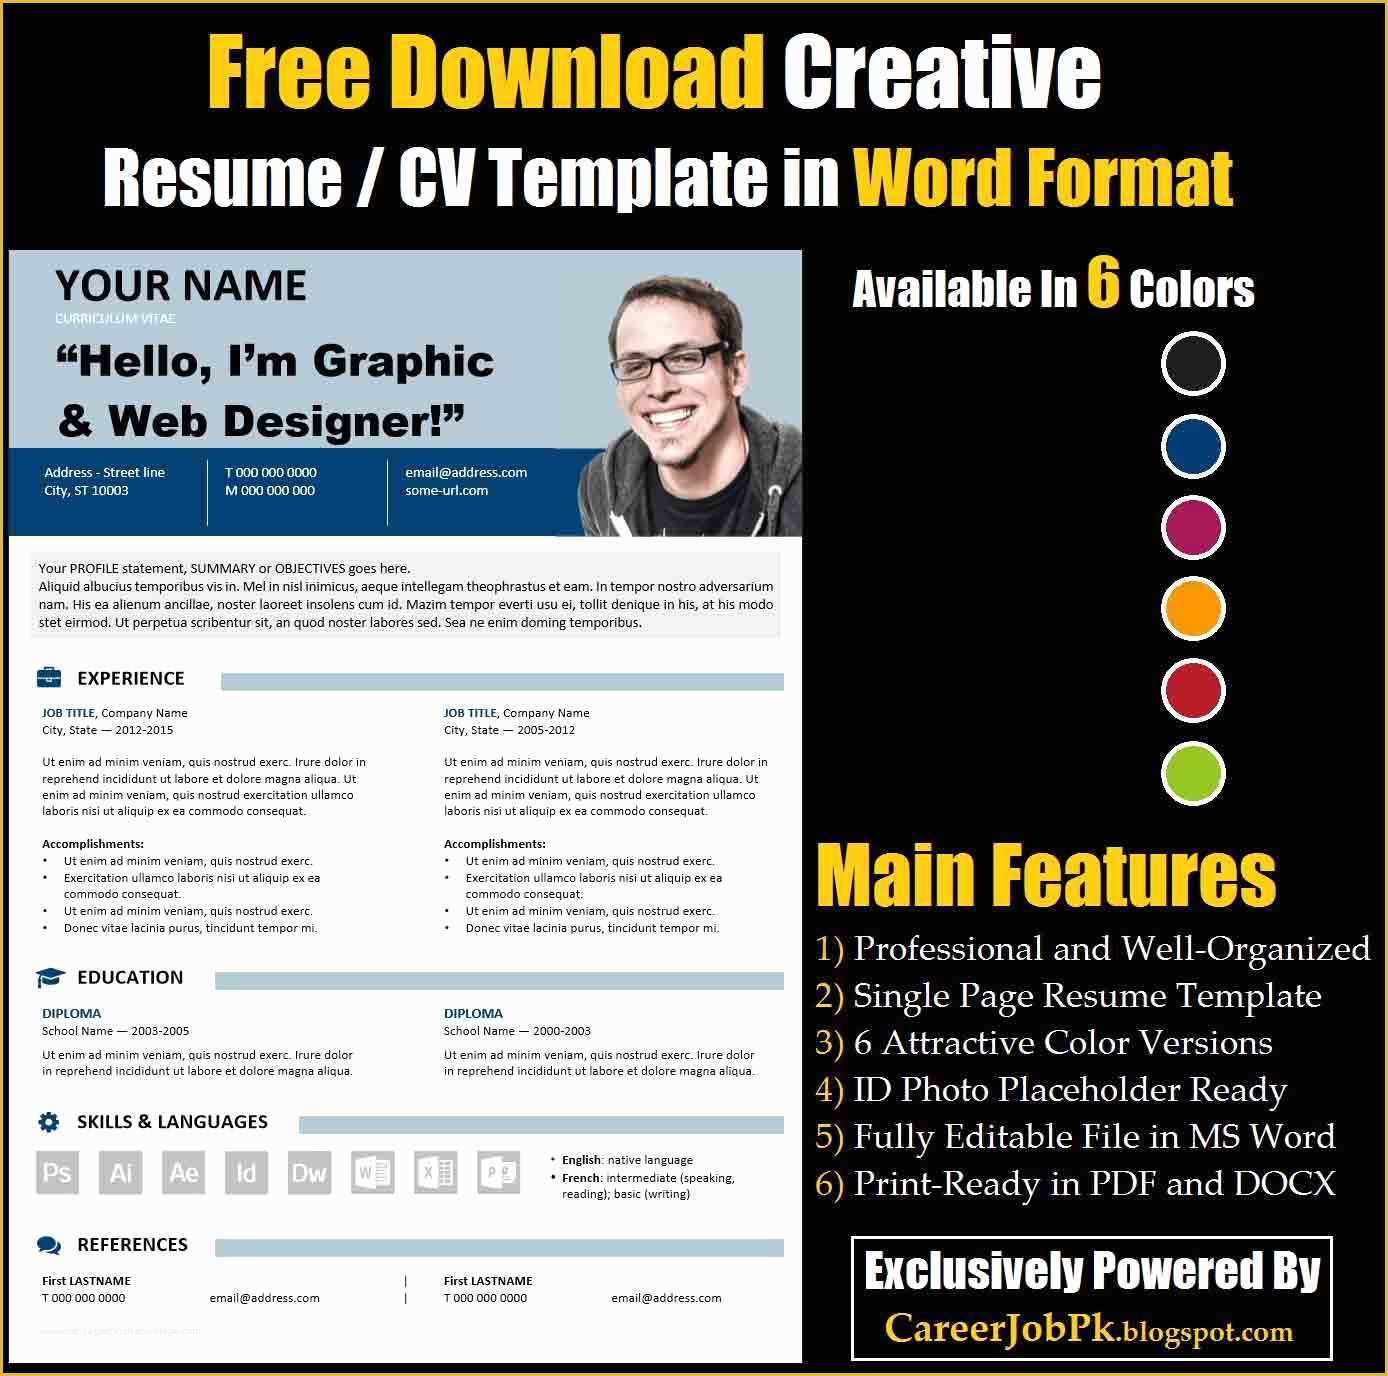 Free Online Resume Templates Download Of Free Download Editable Resume Cv Template In Ms Word format